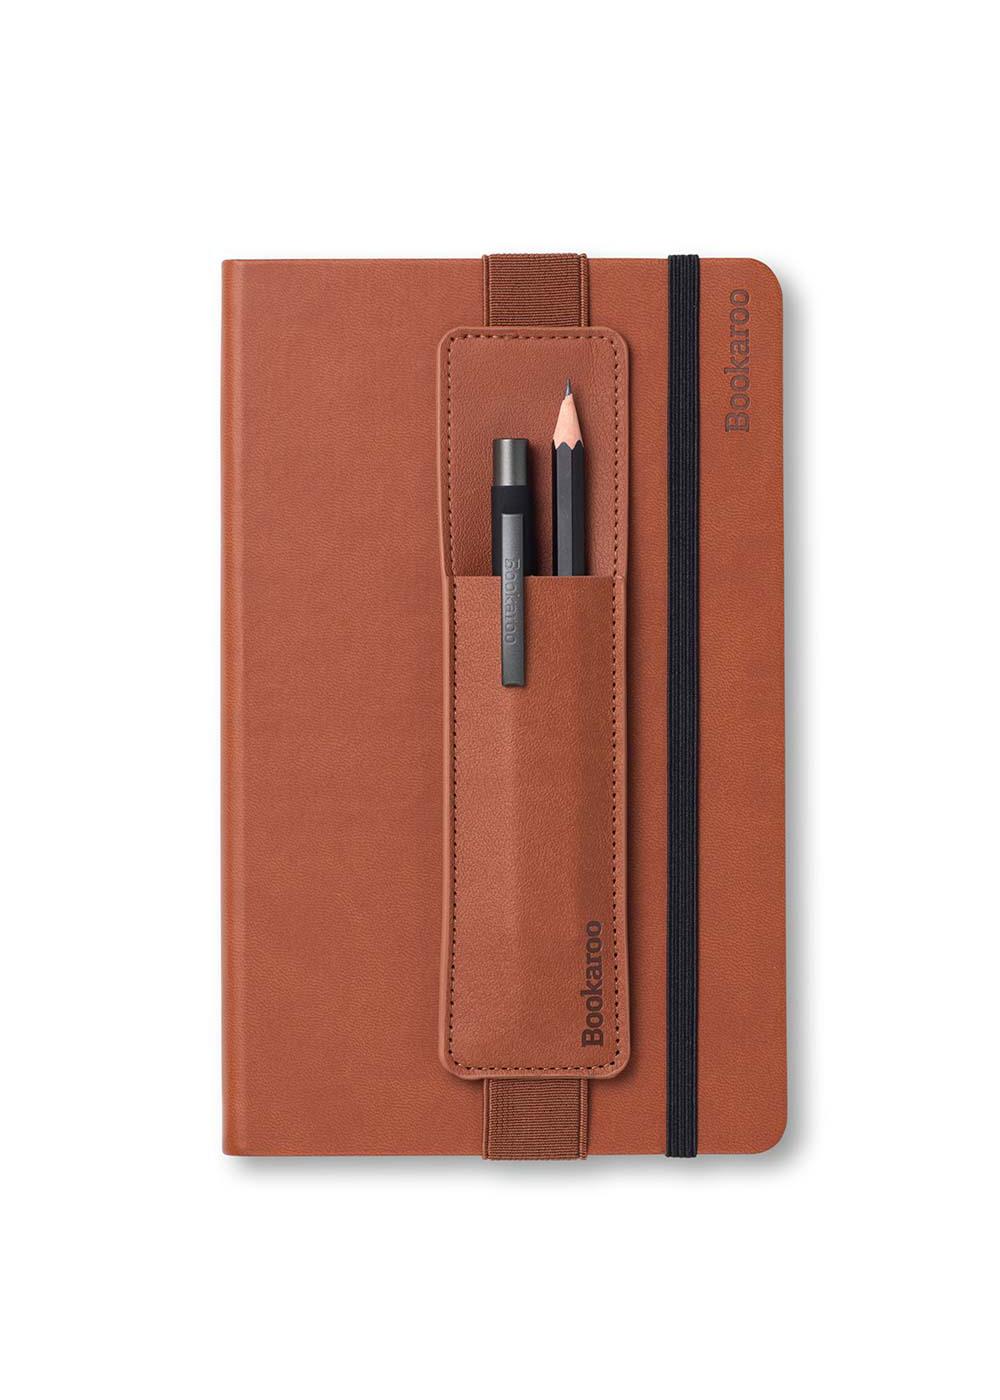 Bookaroo Pen Pouch for Notebooks & Journals – Brown; image 2 of 2